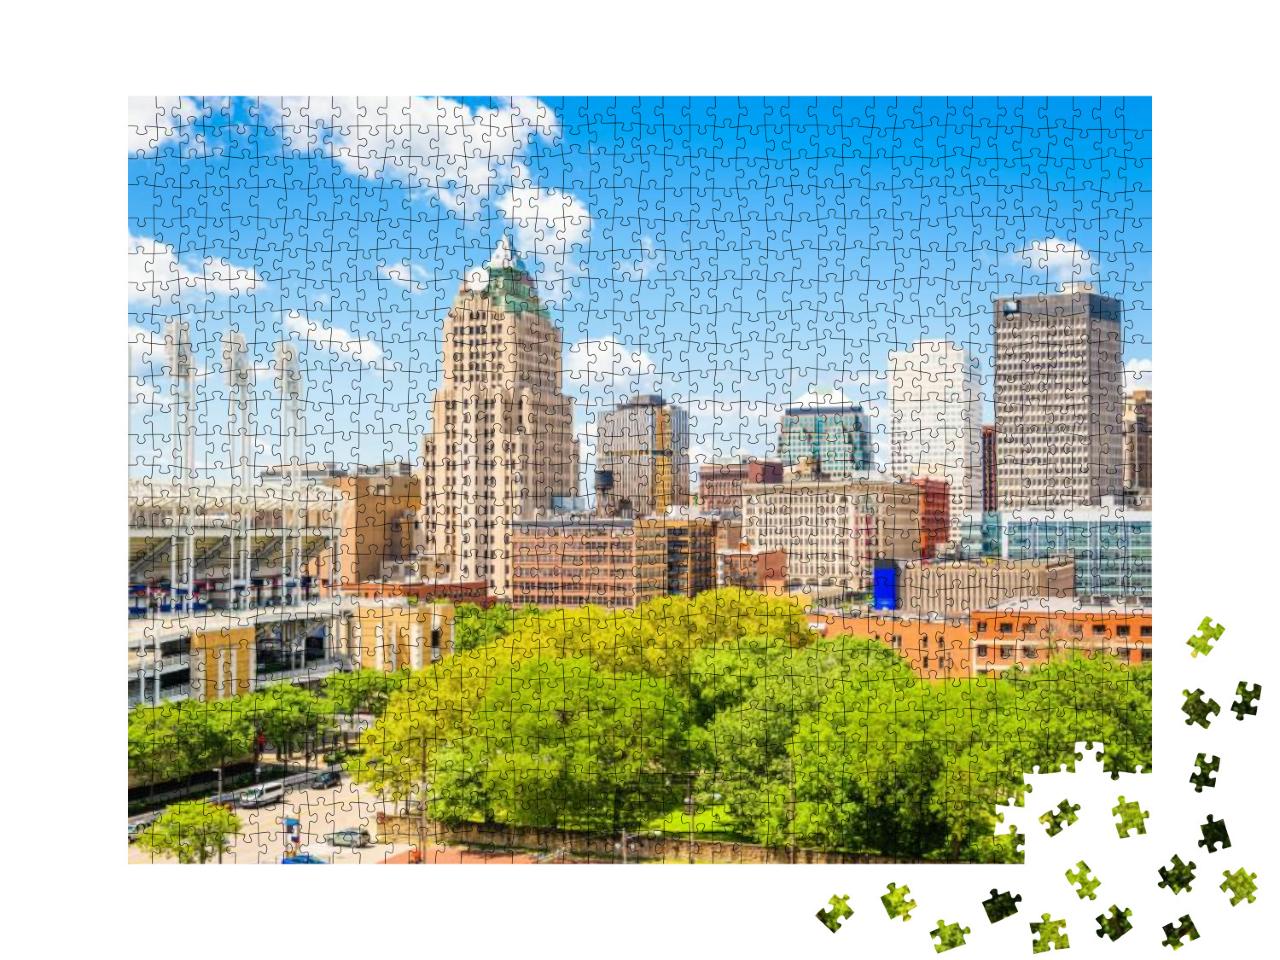 Cleveland, Ohio, USA Downtown City Skyline in the Daytime... Jigsaw Puzzle with 1000 pieces